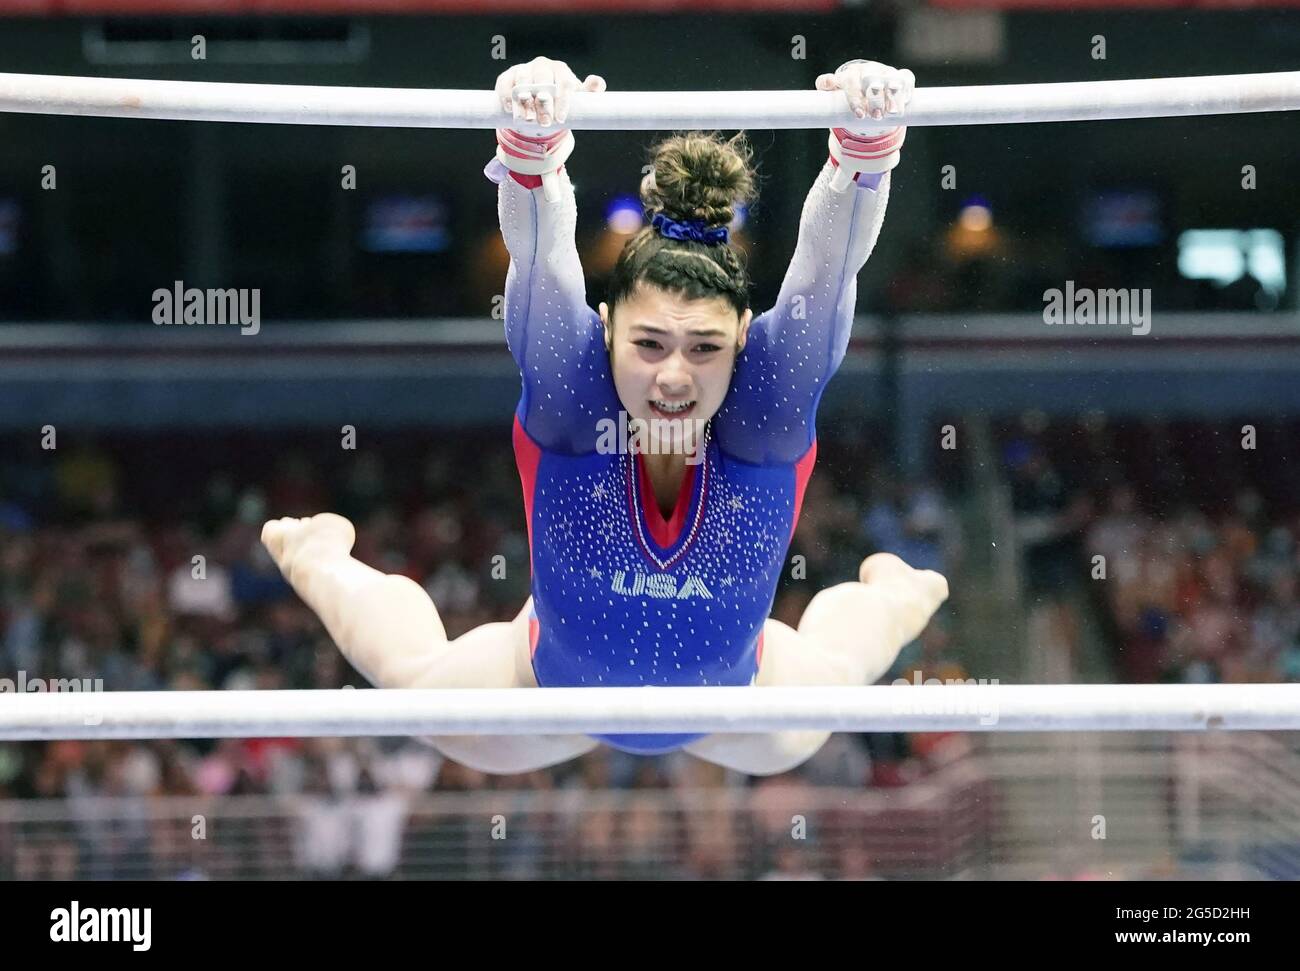 St Louis, USA. 26th June, 2021. Gymnast Kayla DiCello preforms on the uneven bars during Day 1of the Women's U.S. Olympic Gymnastic Trials at the The Dome at America's Center in St. Louis on June 25, 2021. Photo by Bill Greenblatt/UPI Credit: UPI/Alamy Live News Credit: UPI/Alamy Live News Stock Photo